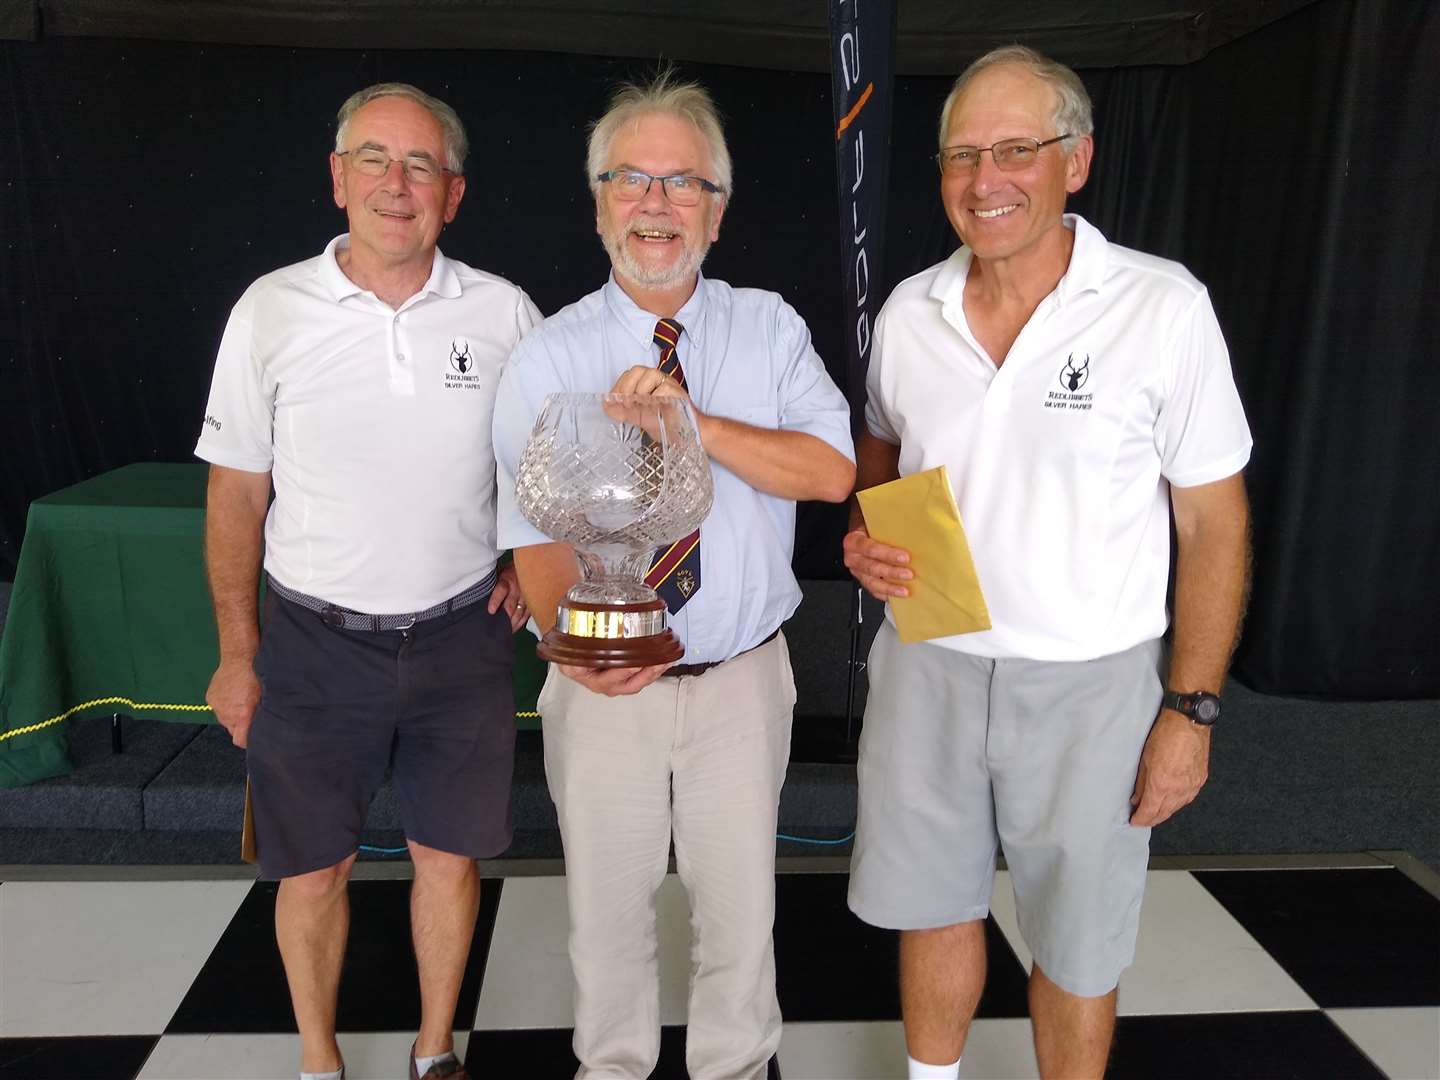 League sponsor Derek Richford of Golfstream Trolleys presenting Andy Burton and David Fowler of Redlibbets with the Pairs Championship Trophy